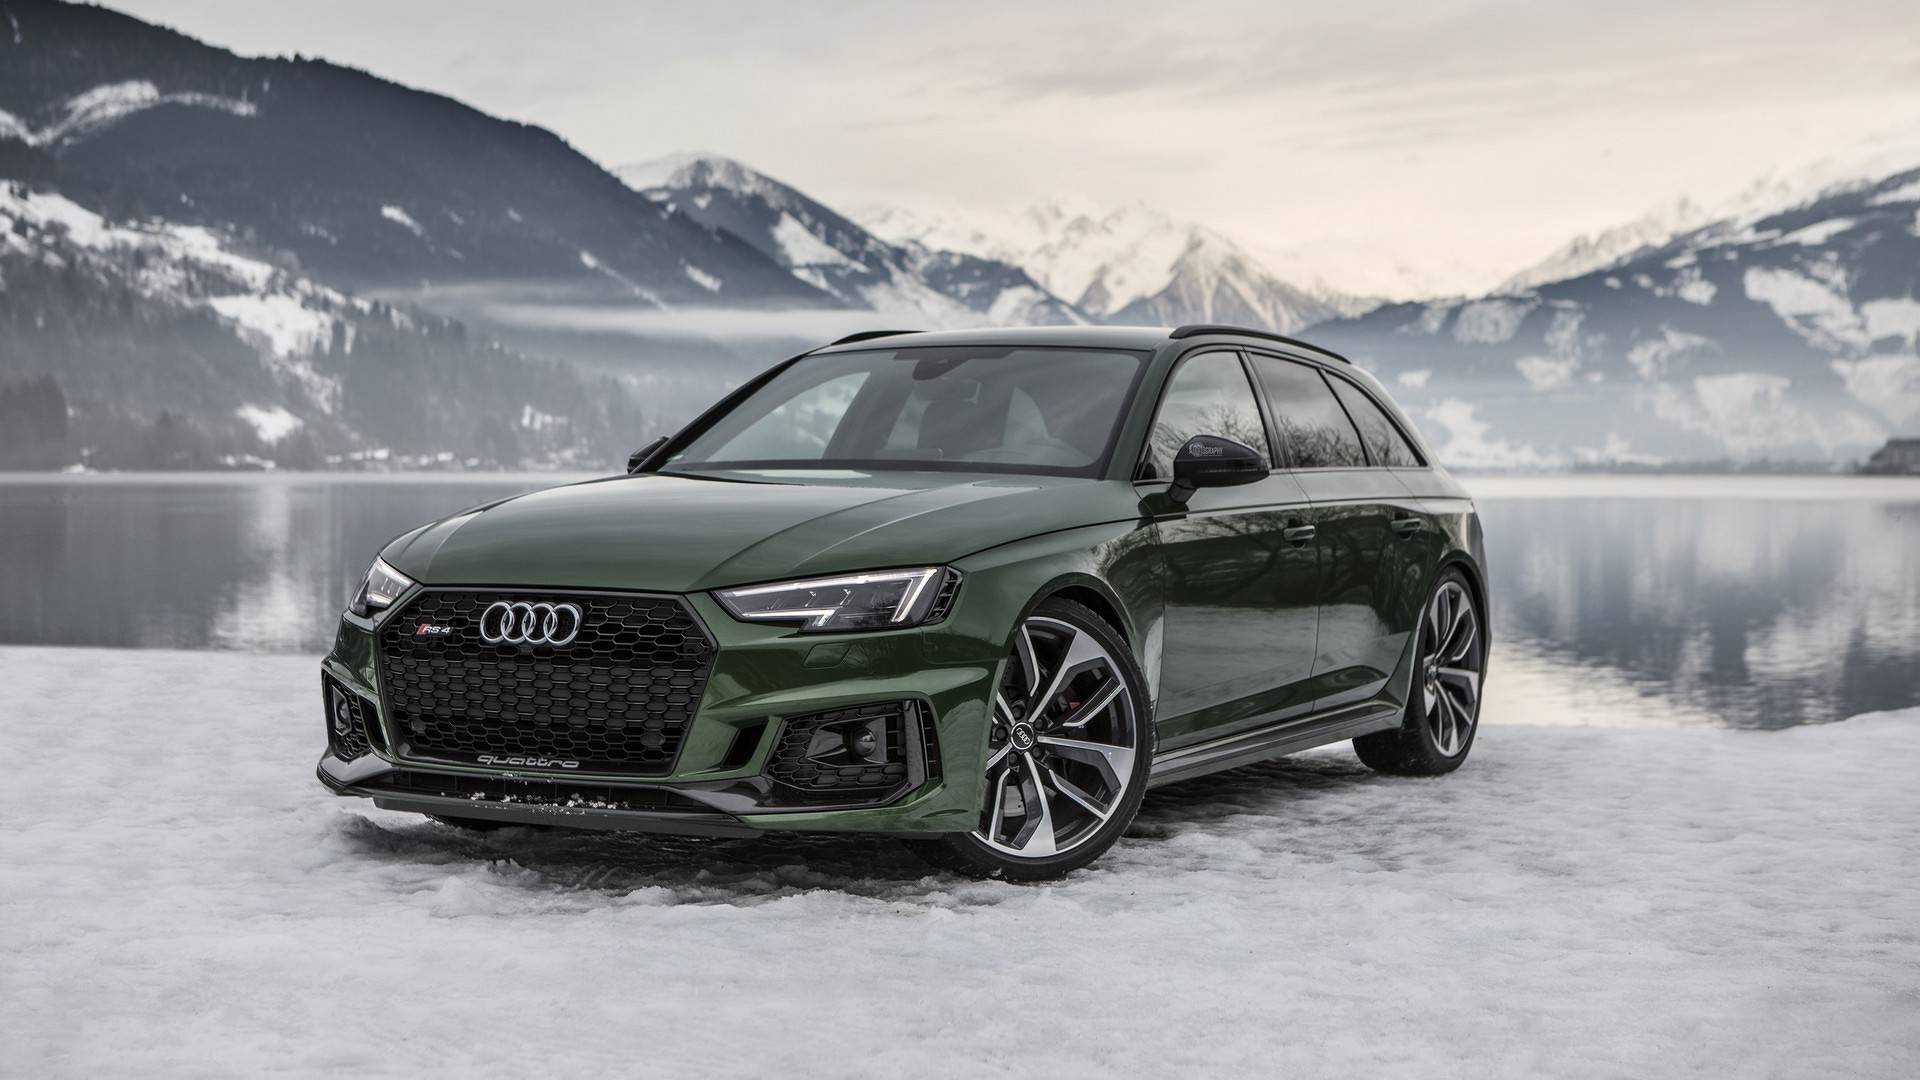 Free Download Audi Rs4 Avant Flaunts Sonoma Green Paint In A Winter Wonderland 1920x1080 For Your Desktop Mobile Tablet Explore 34 Audi Rs4 Audi Rs4 Audi Rs4 Wallpaper Rs4 Wallpaper